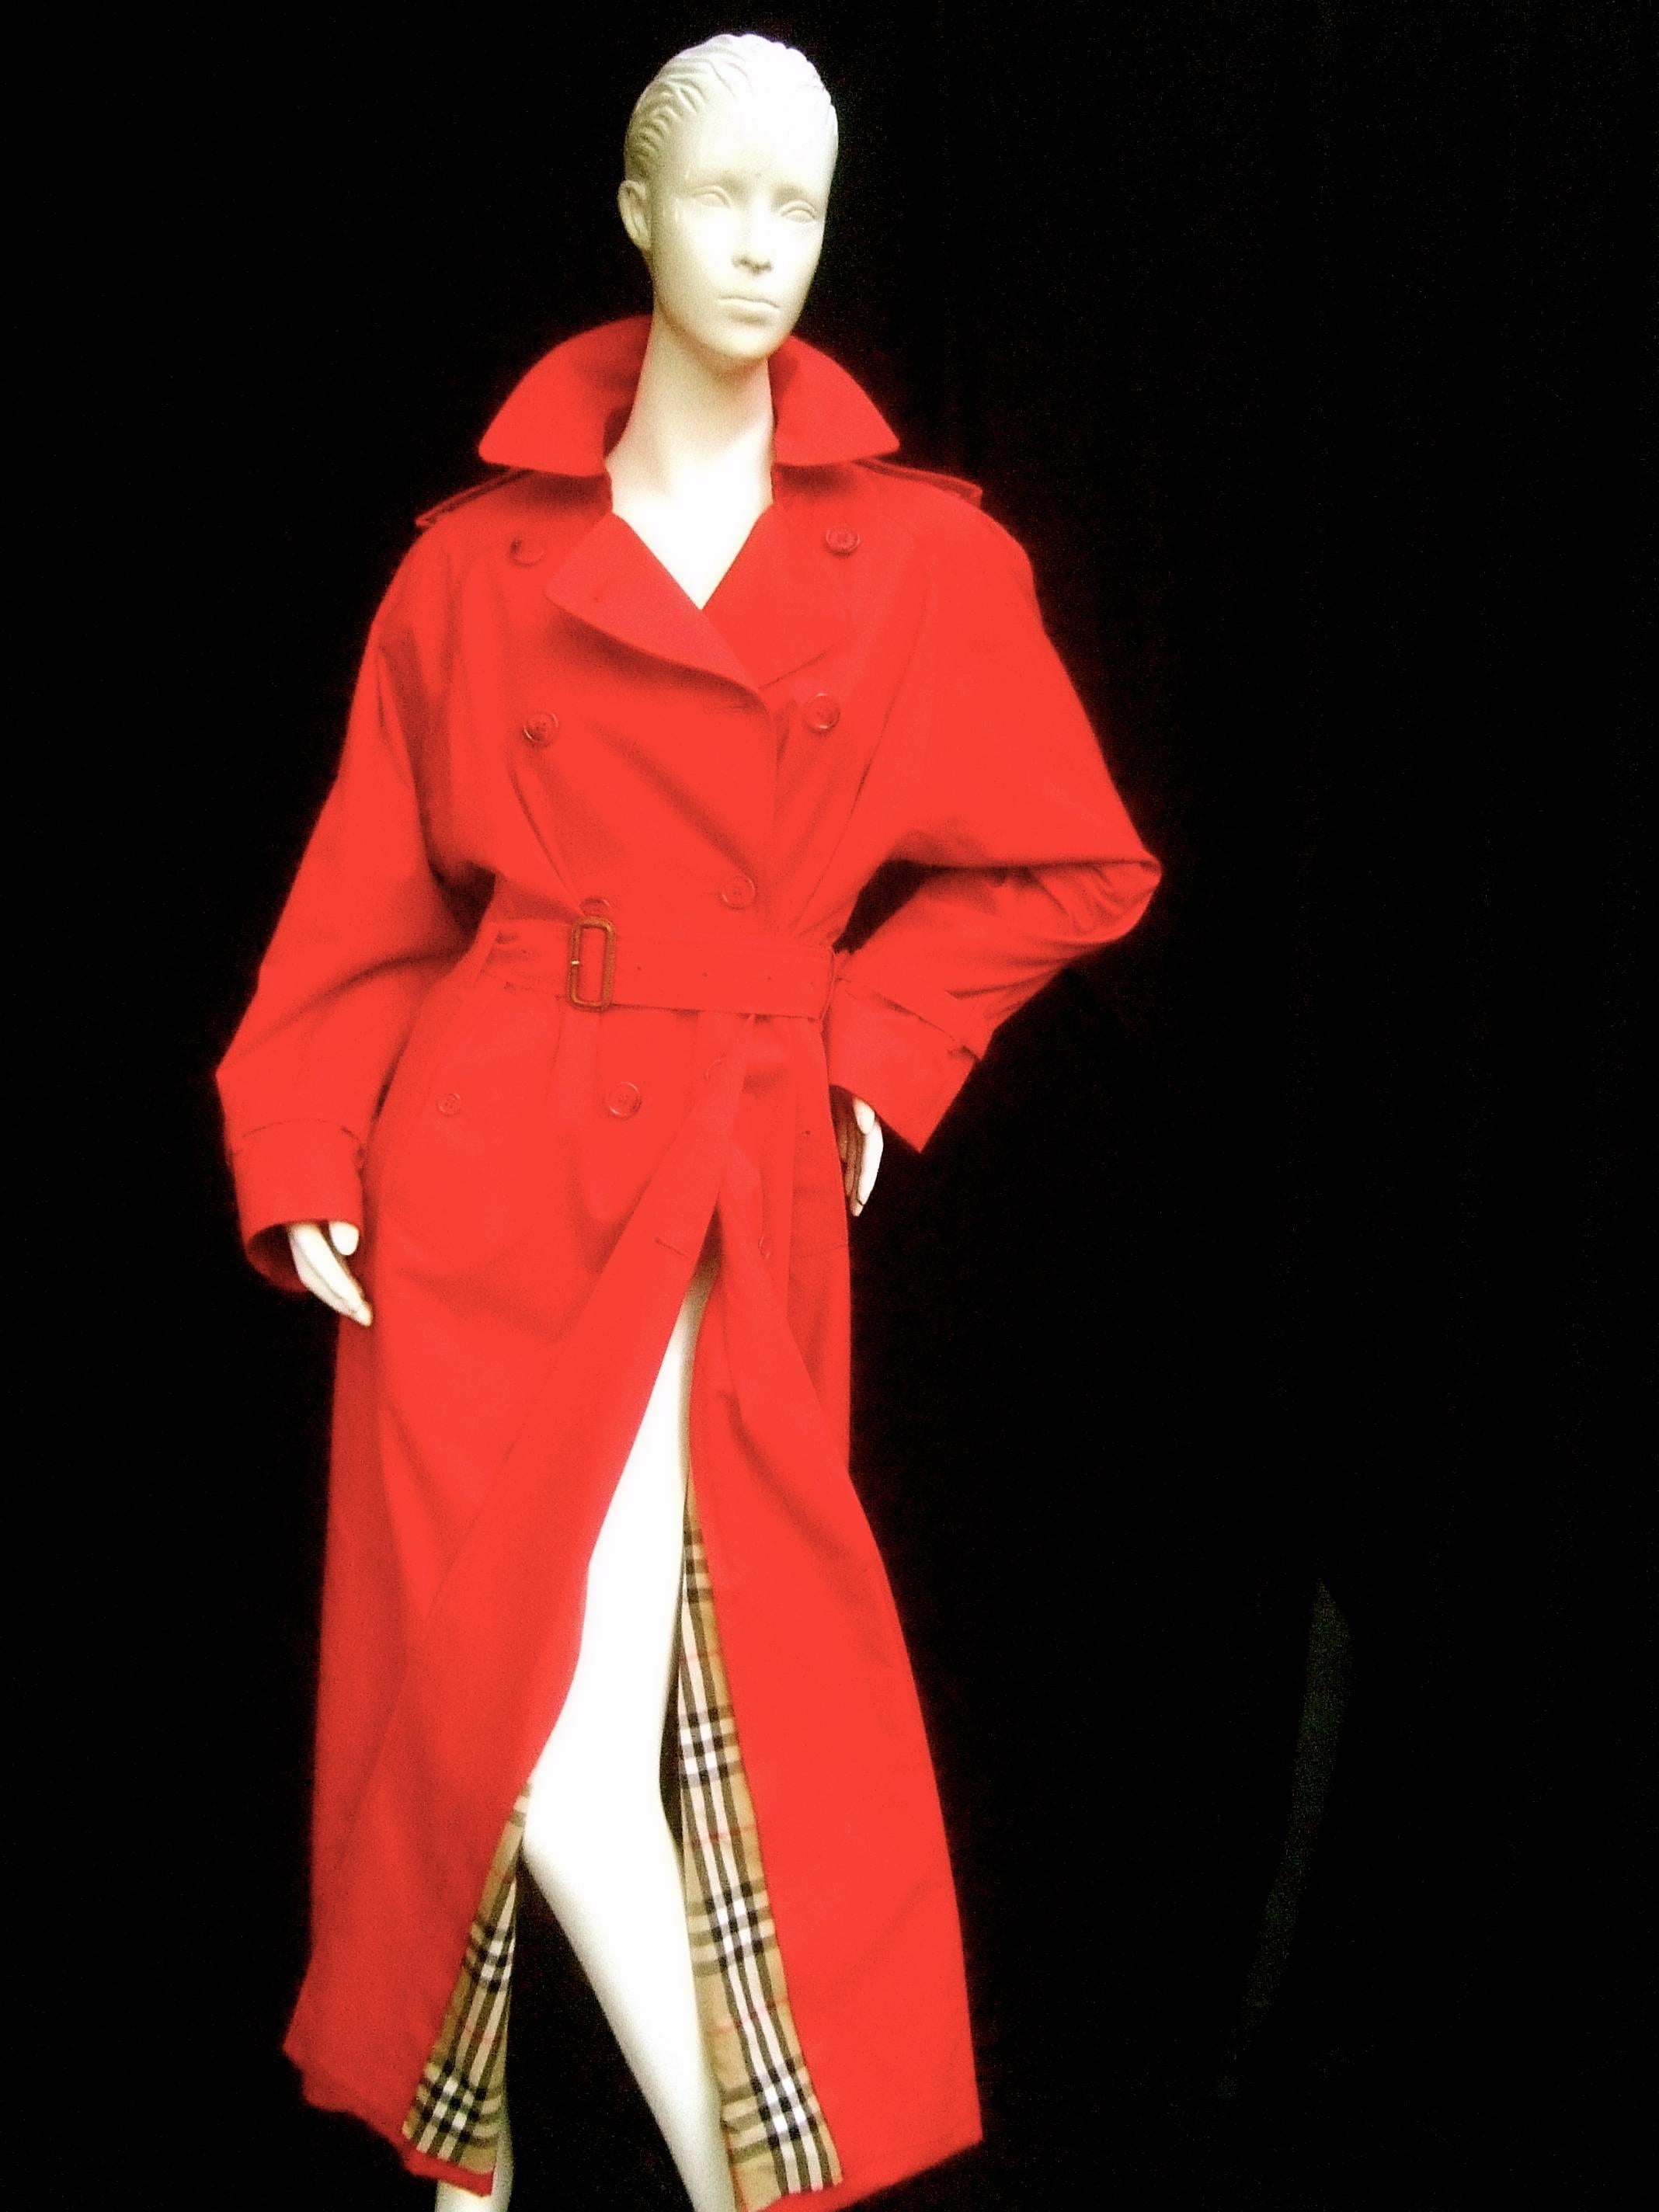 Burberry's Cherry red nova plaid trench coat c 1990s
The classic English trench coat with a bold twist
of vibrant red color

The belted trench coat is lined in Burberry's signature
nova plaid lining. Perfect for Fall or Spring weather 